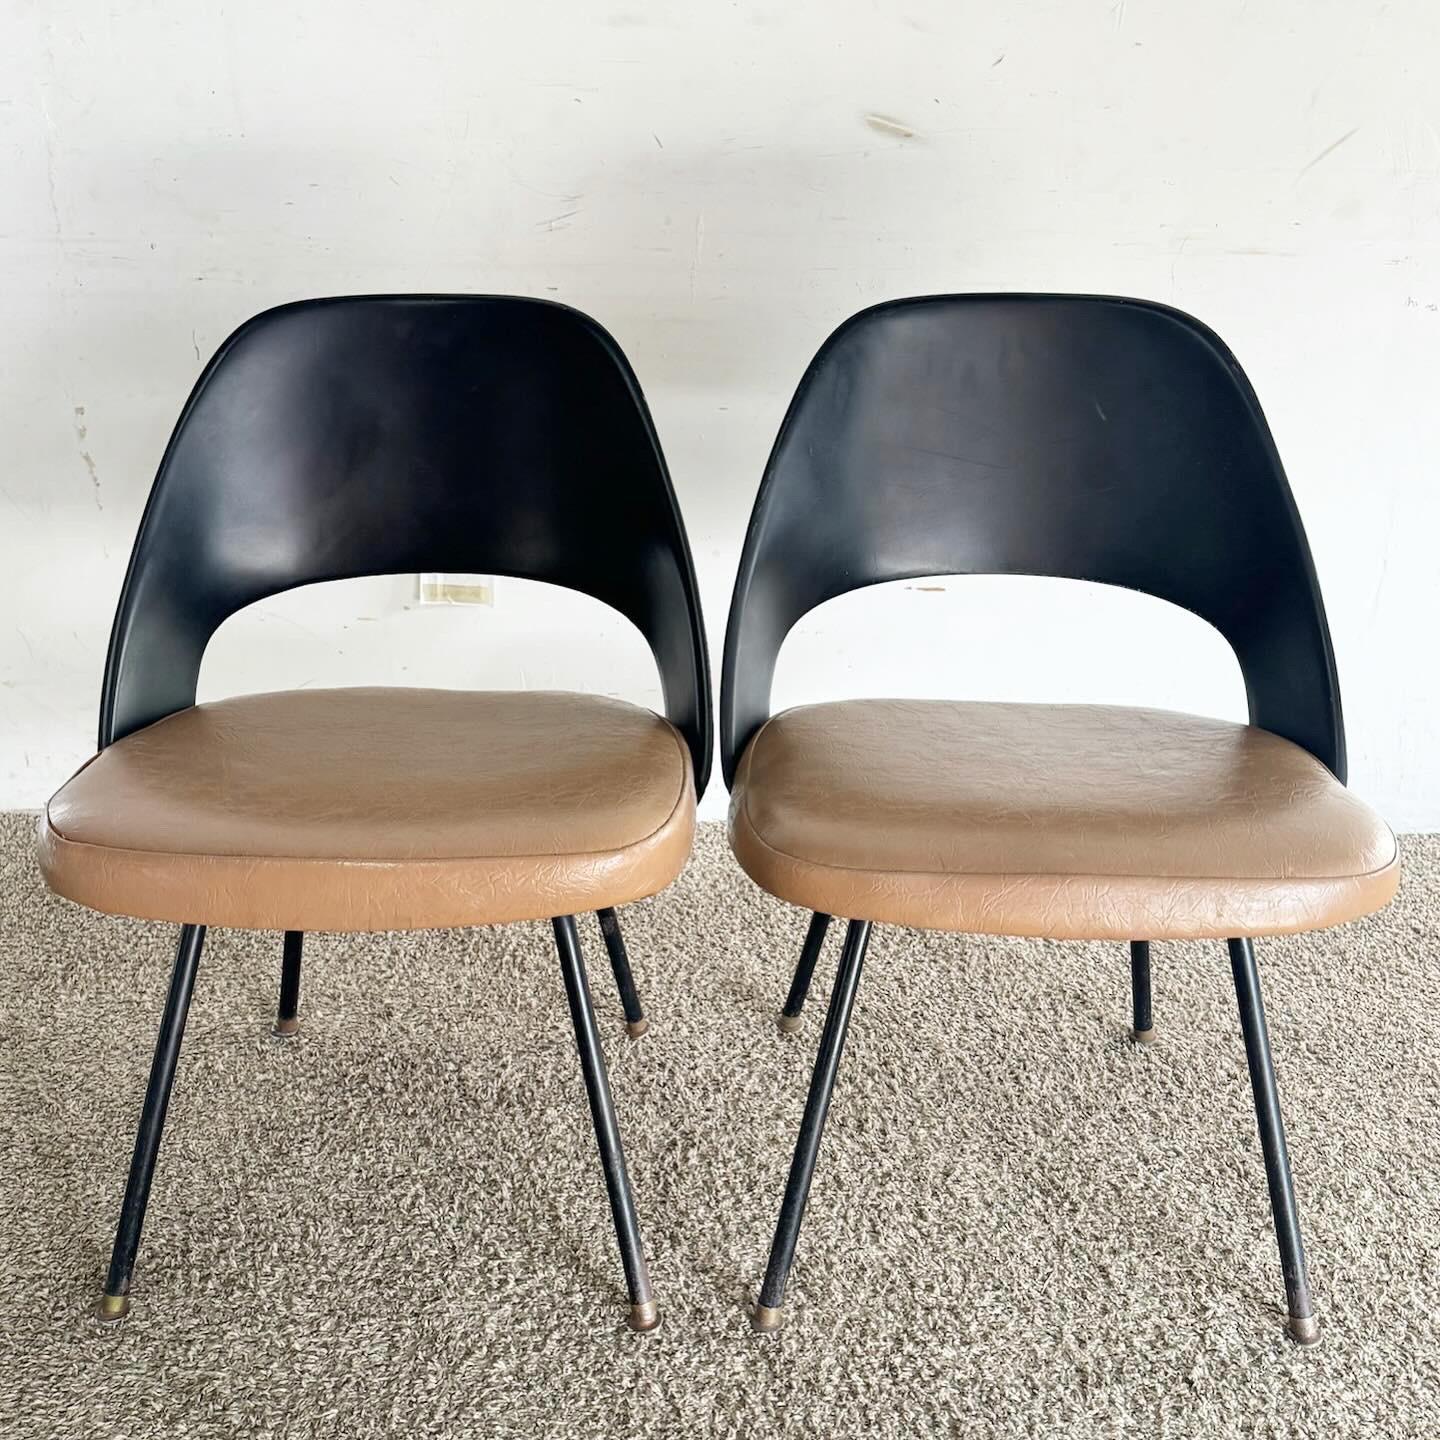 The Mid Century Modern Eero Saarinen Model 42 Style Dining Chairs, in a set of four, are a tribute to classic design. Featuring sleek black fiberglass backrests and elegant metal prong legs, these chairs capture Saarinen's timeless aesthetic. They